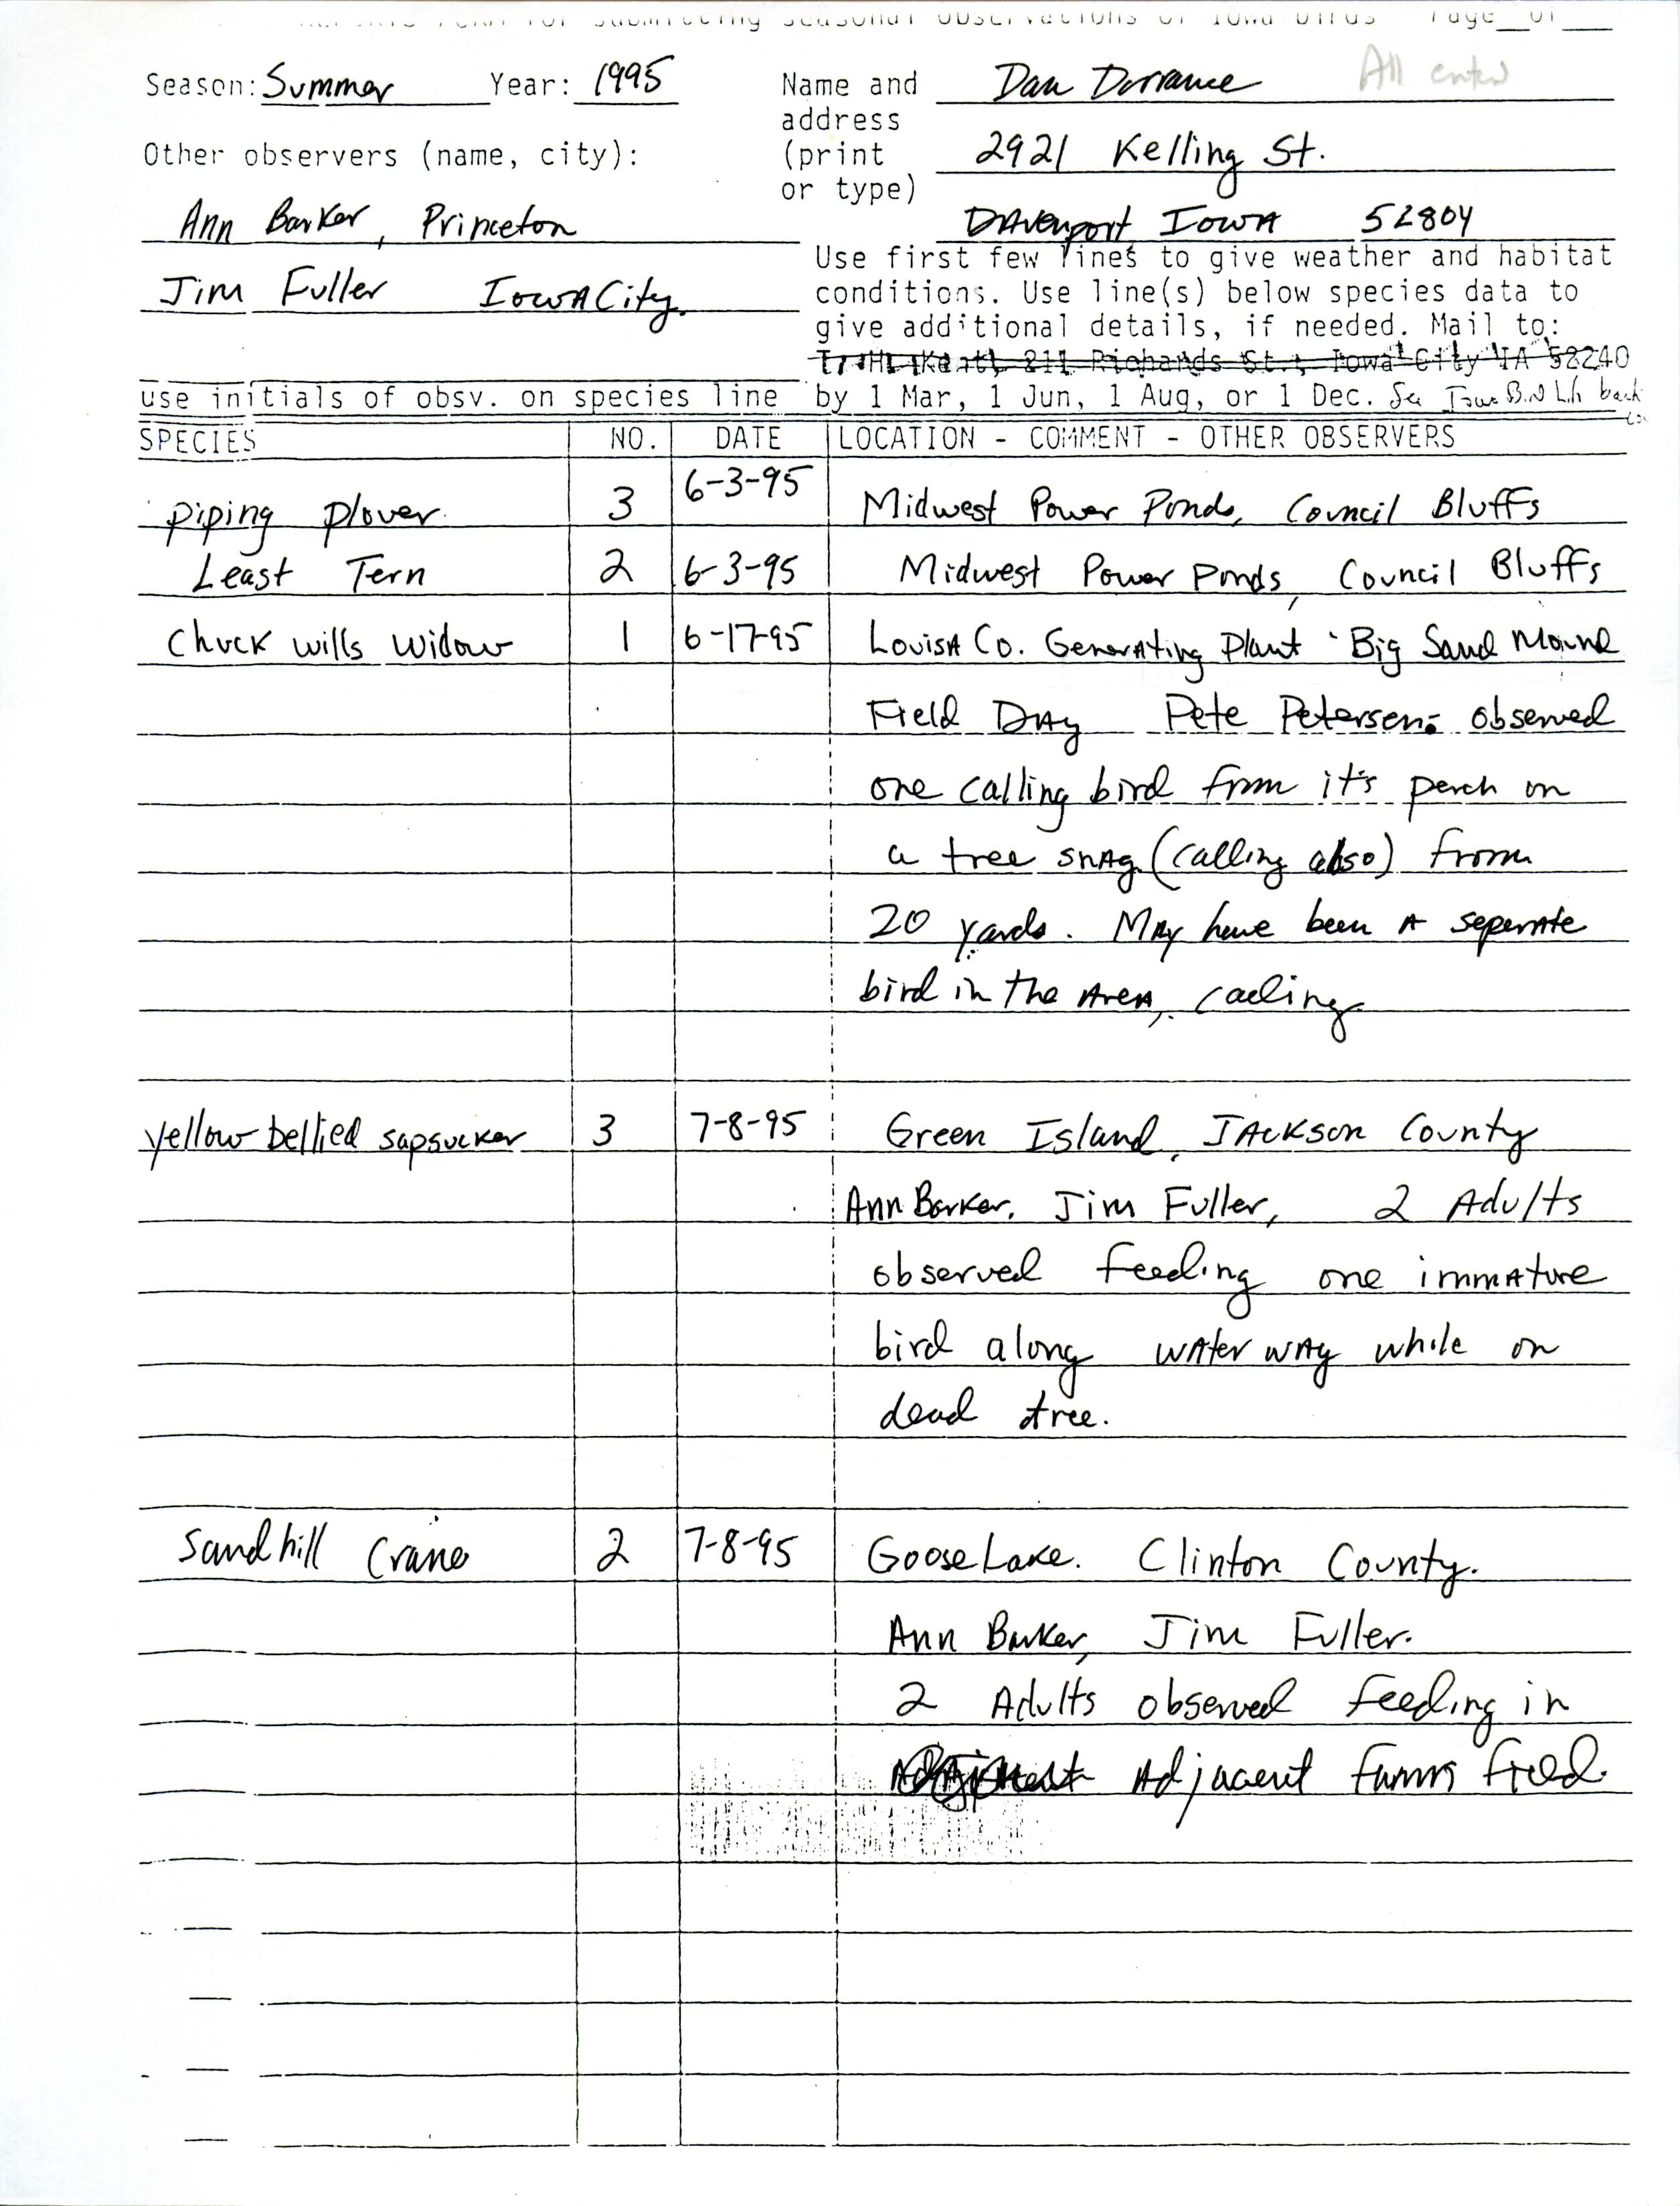 Field reports form for submitting seasonal observations of Iowa birds, summer 1995, Dan Dorrance